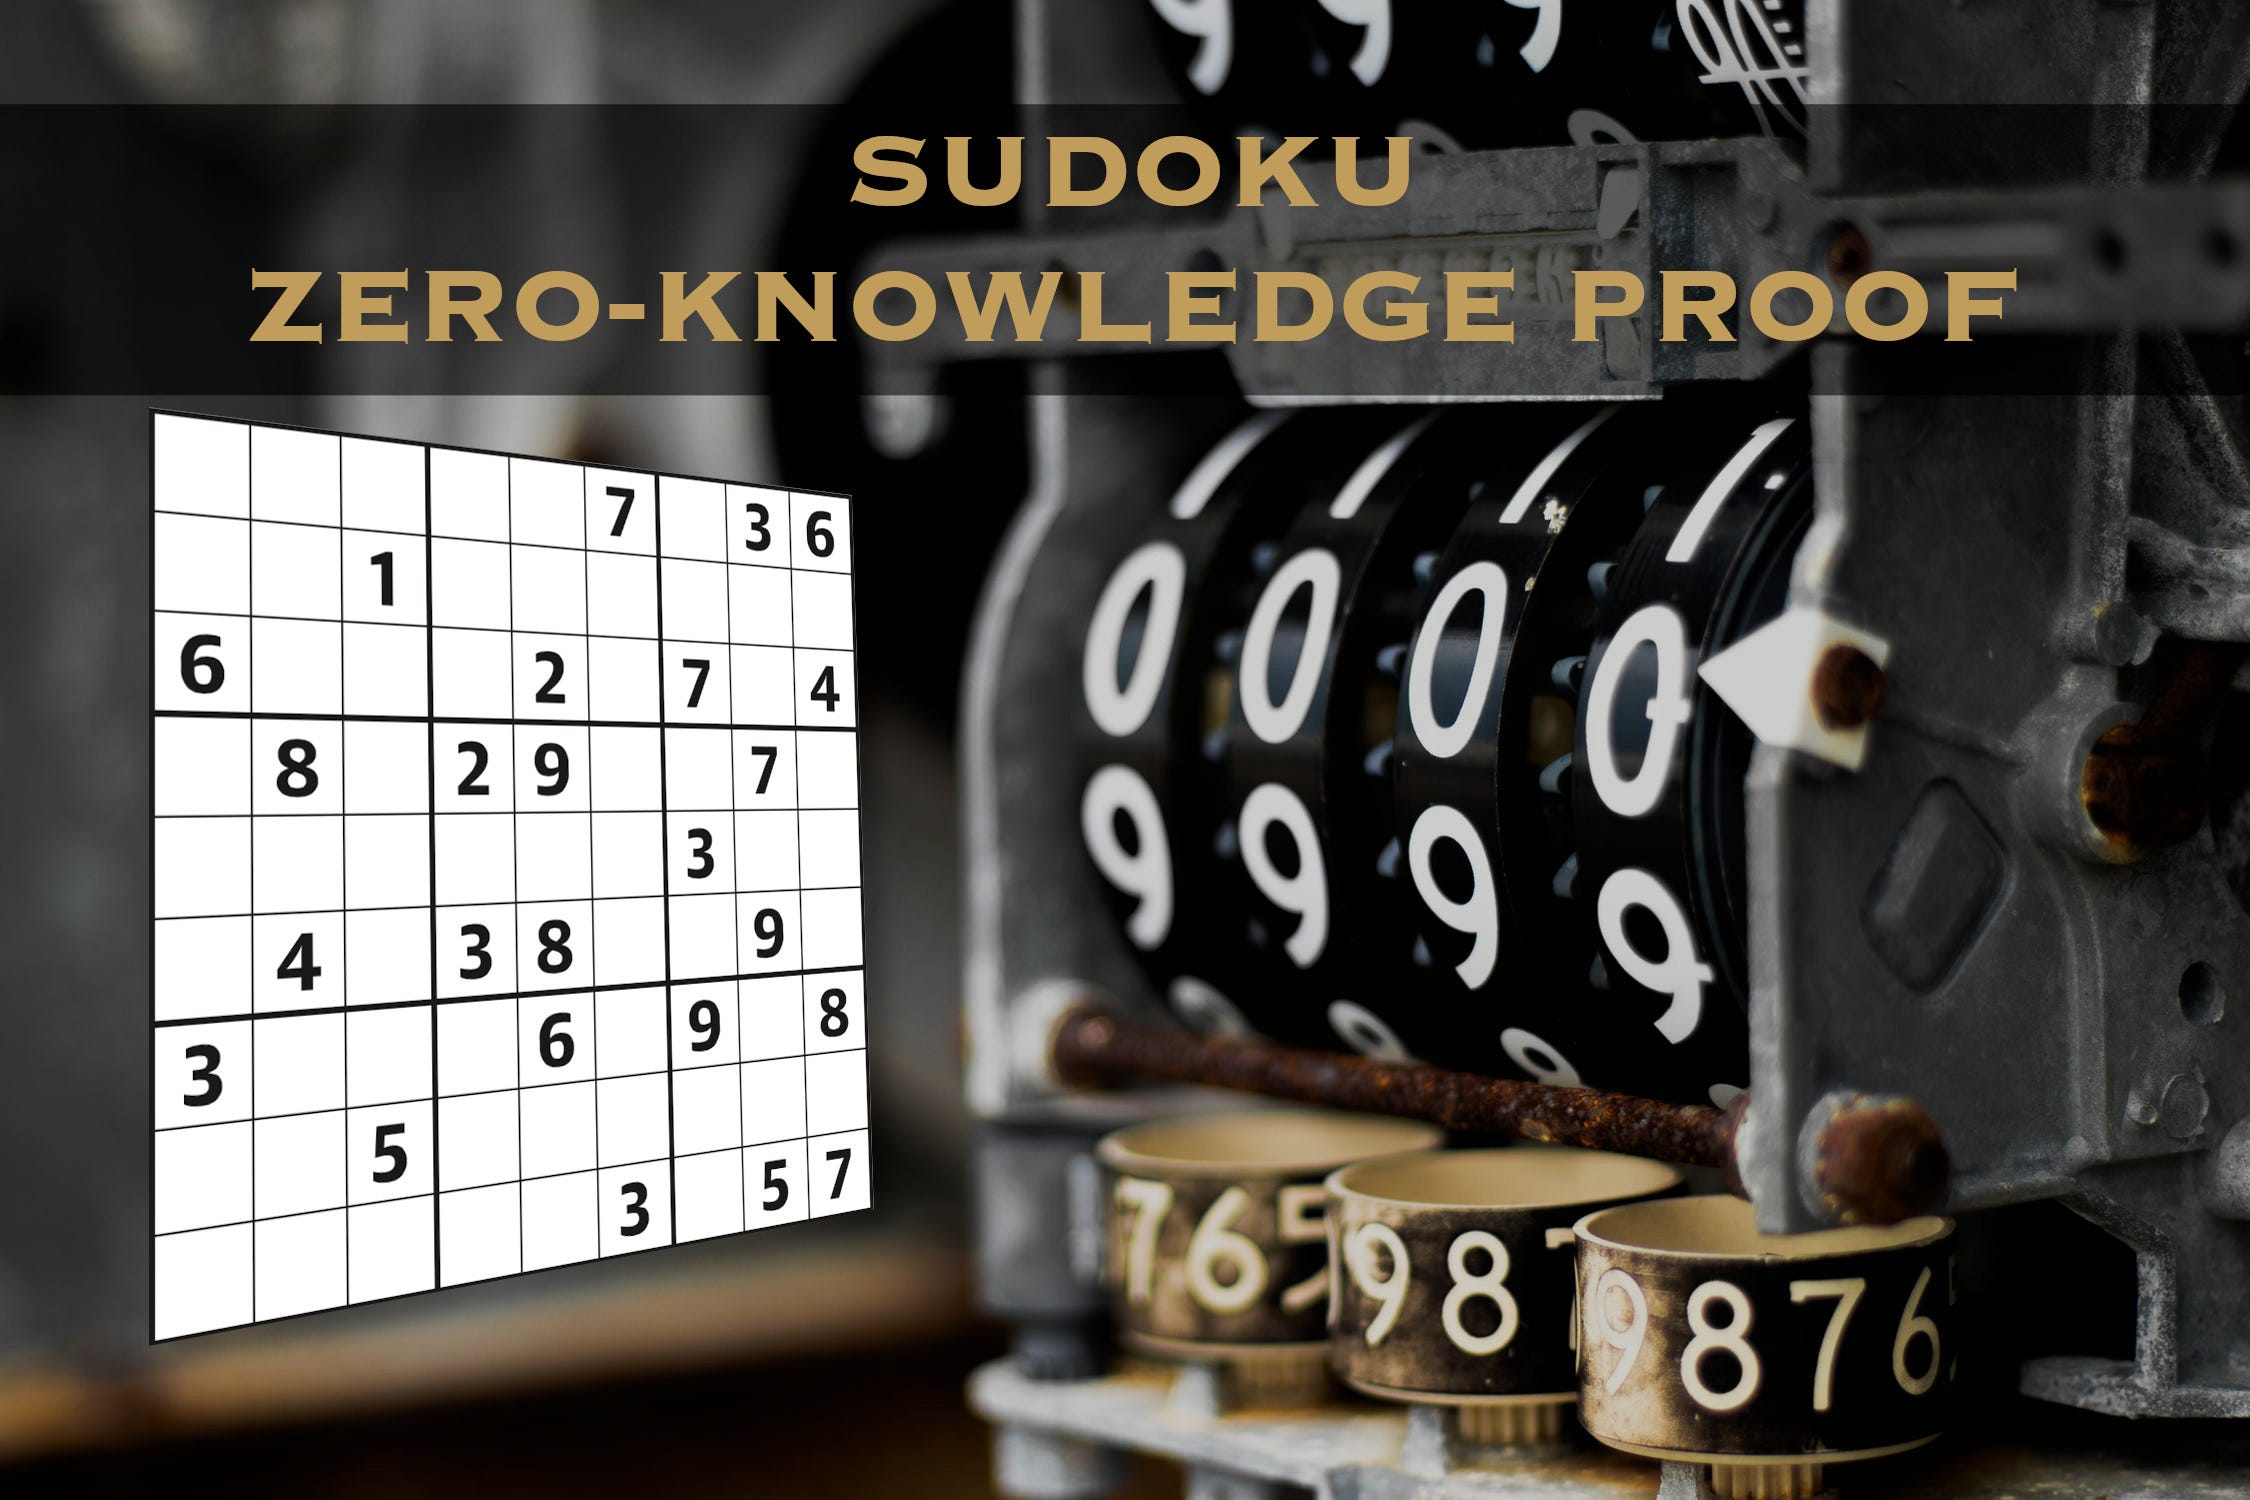 Competitive Sudoku: Join this Exciting World - Sudoku Essentials